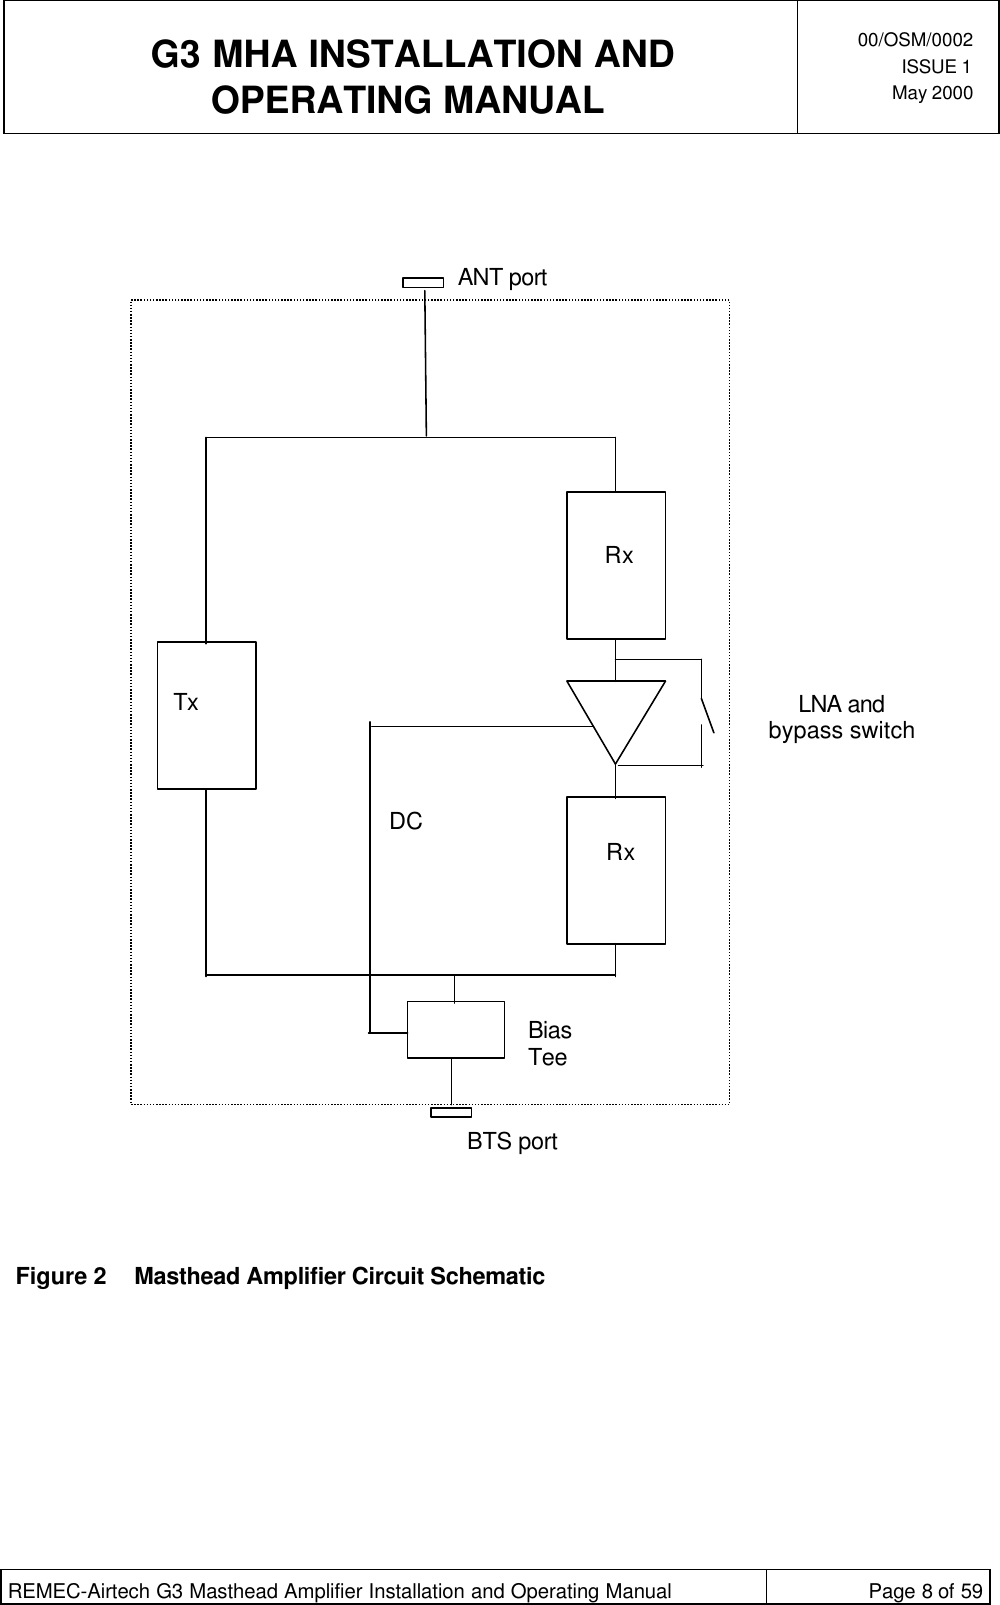  G3 MHA INSTALLATION ANDOPERATING MANUAL00/OSM/0002ISSUE 1May 2000REMEC-Airtech G3 Masthead Amplifier Installation and Operating Manual Page 8 of 59Figure 2Masthead Amplifier Circuit SchematicANT portRxTx LNA andbypass switchRxBTS portDC      Bias      Tee